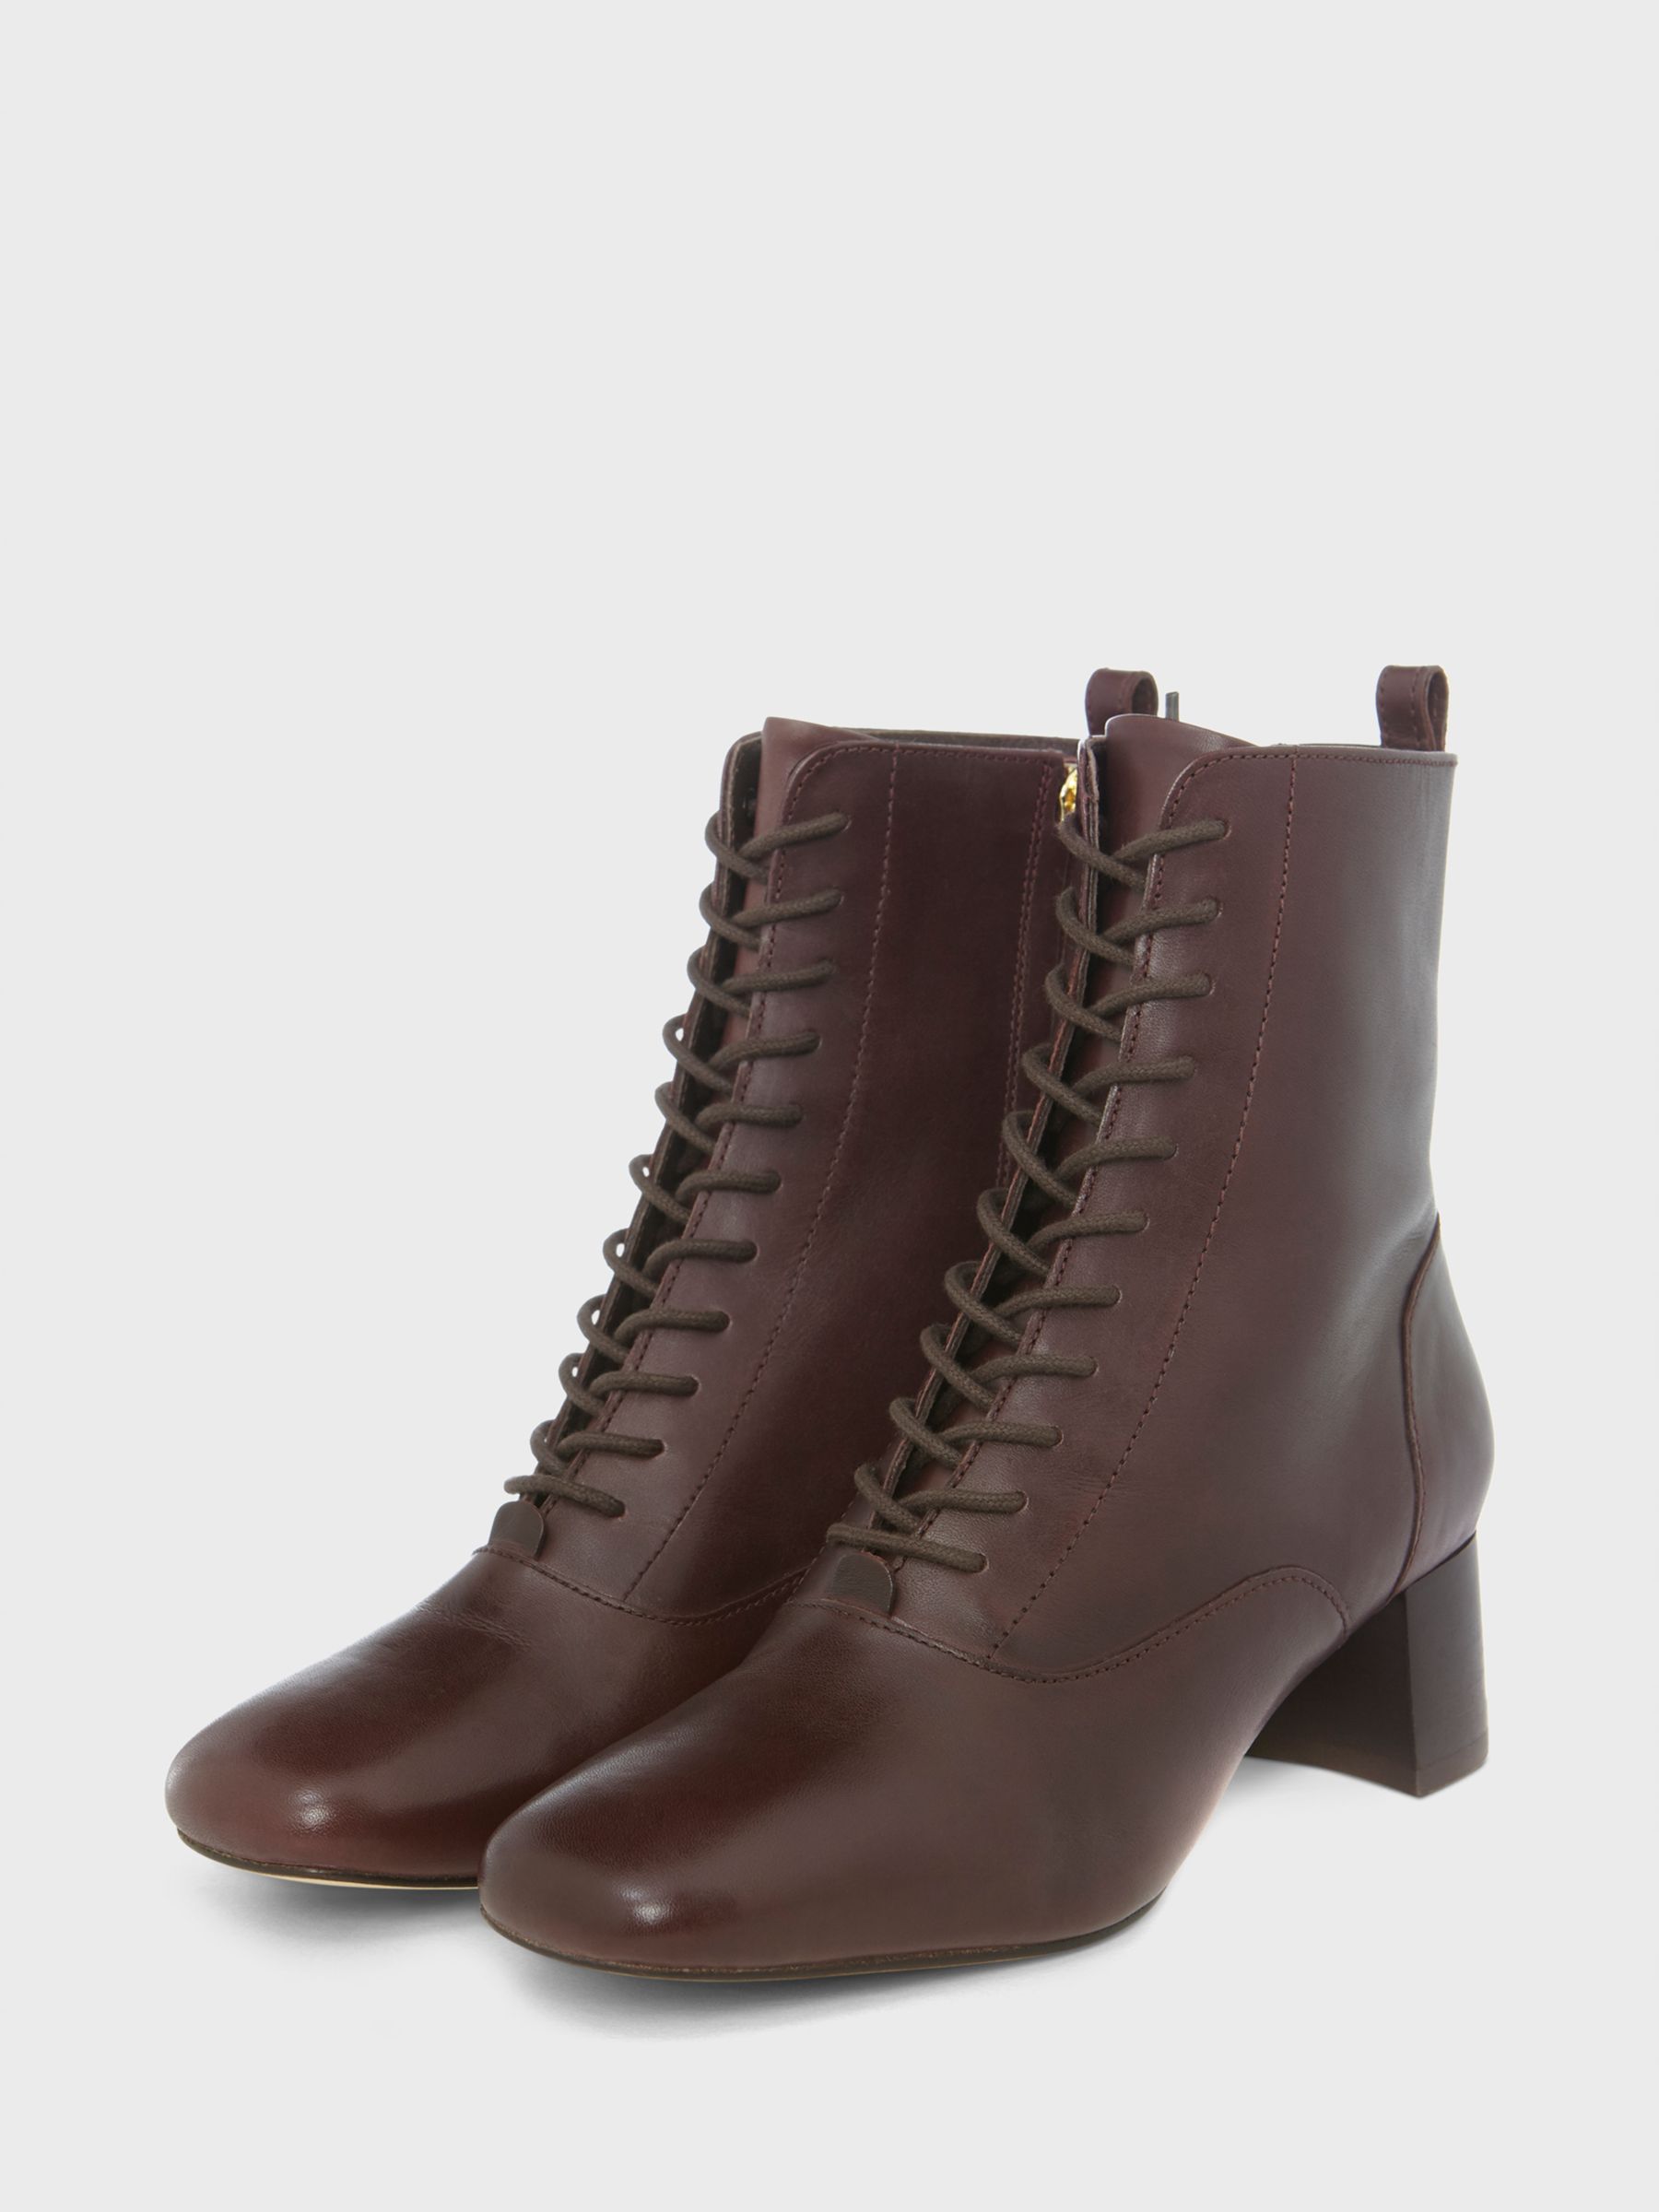 Hobbs Issy Leather Lace Up Ankle Boots, Dark Plum at John Lewis & Partners